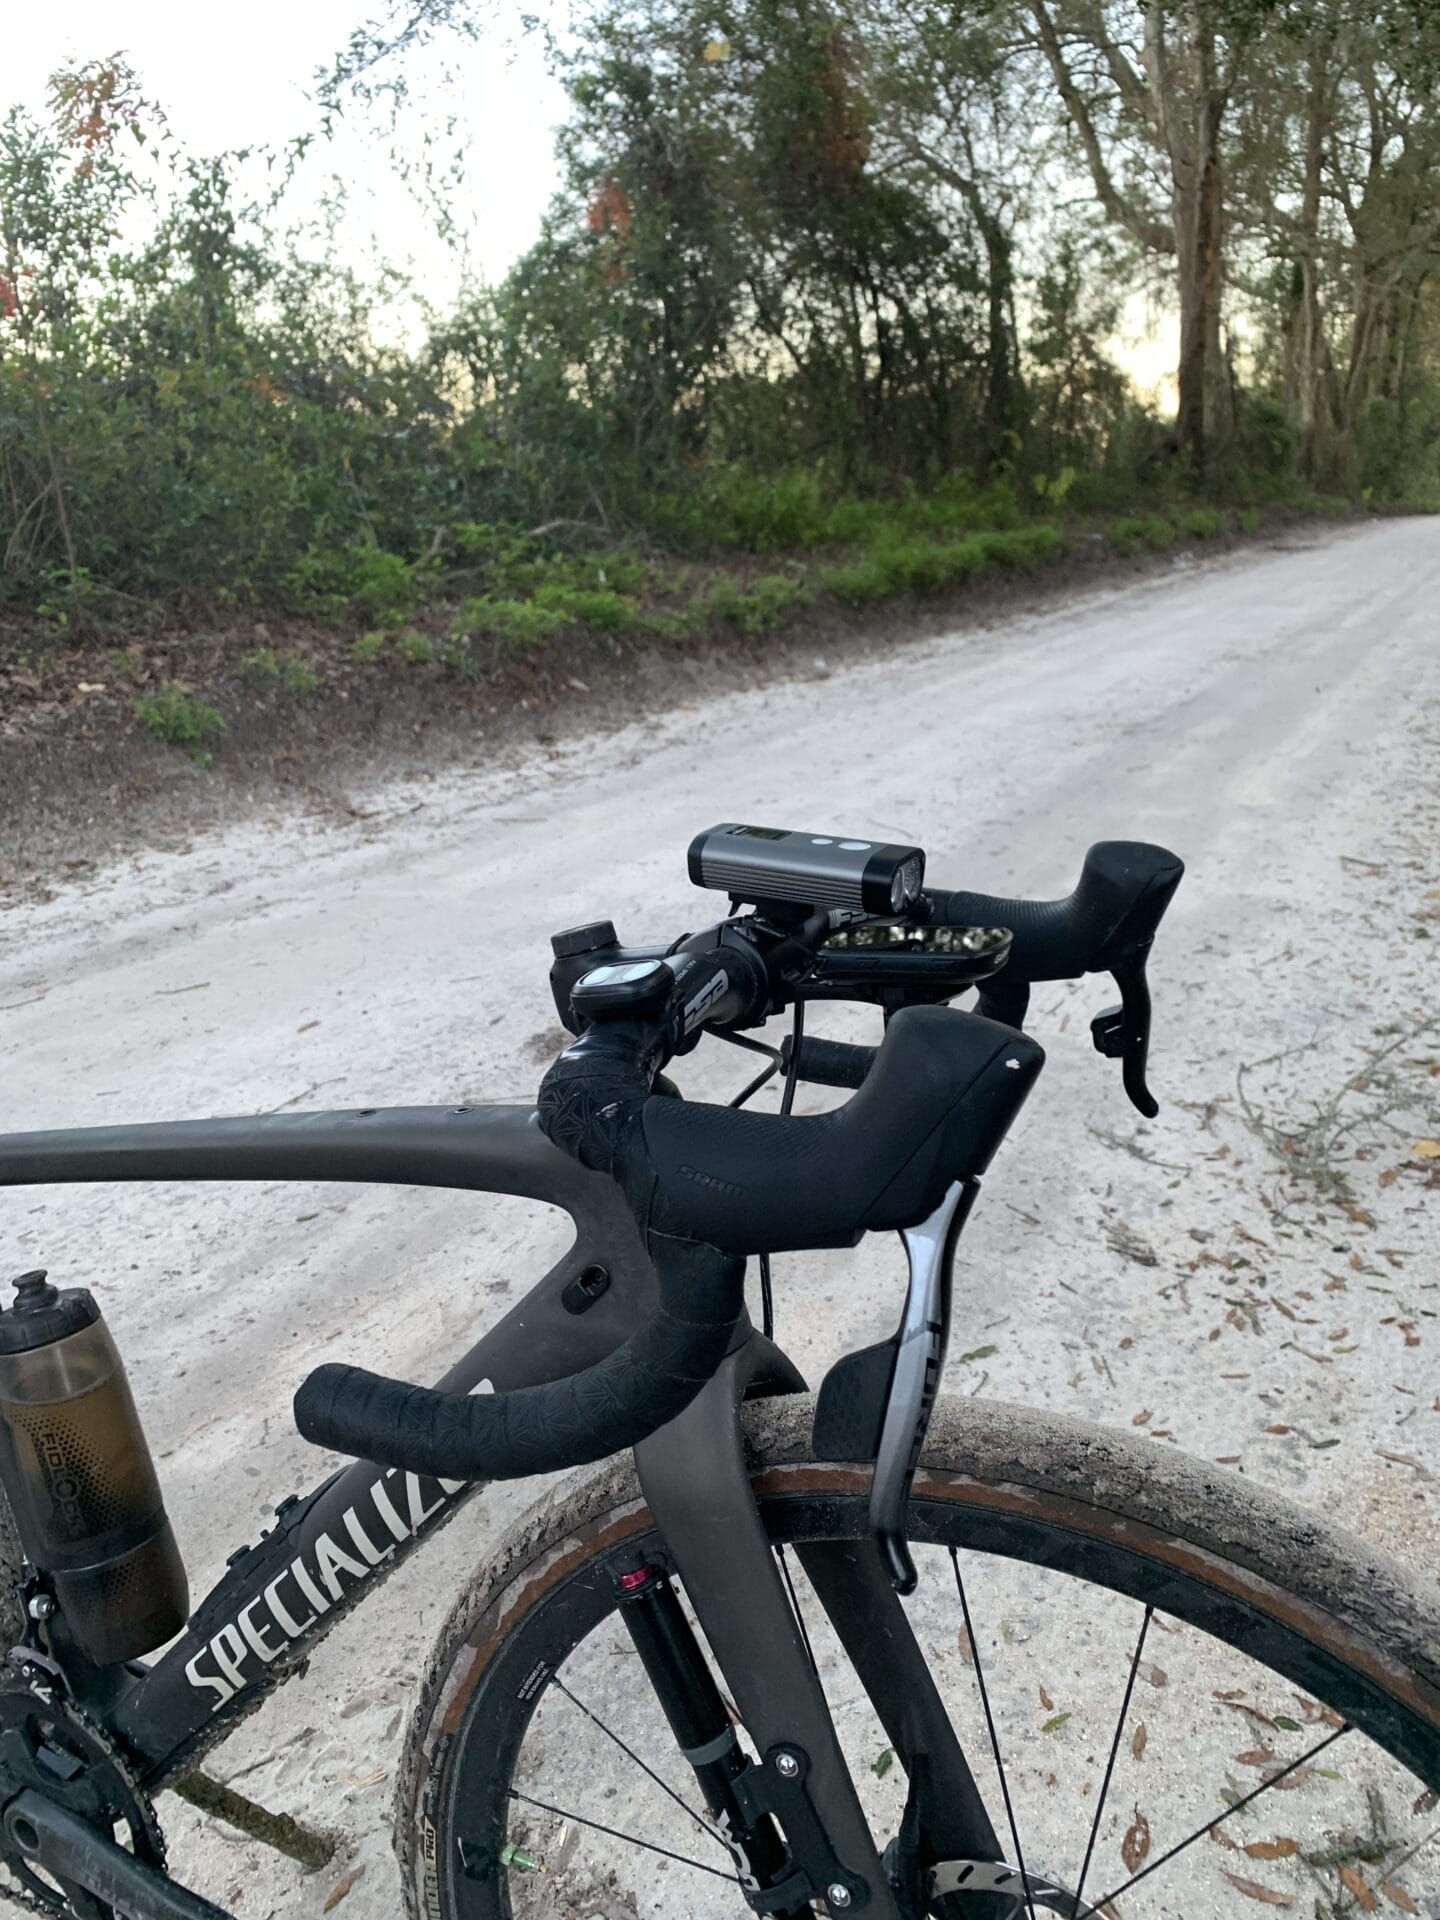 Ravement PR2000 mounted on the gravel bike with drop bars